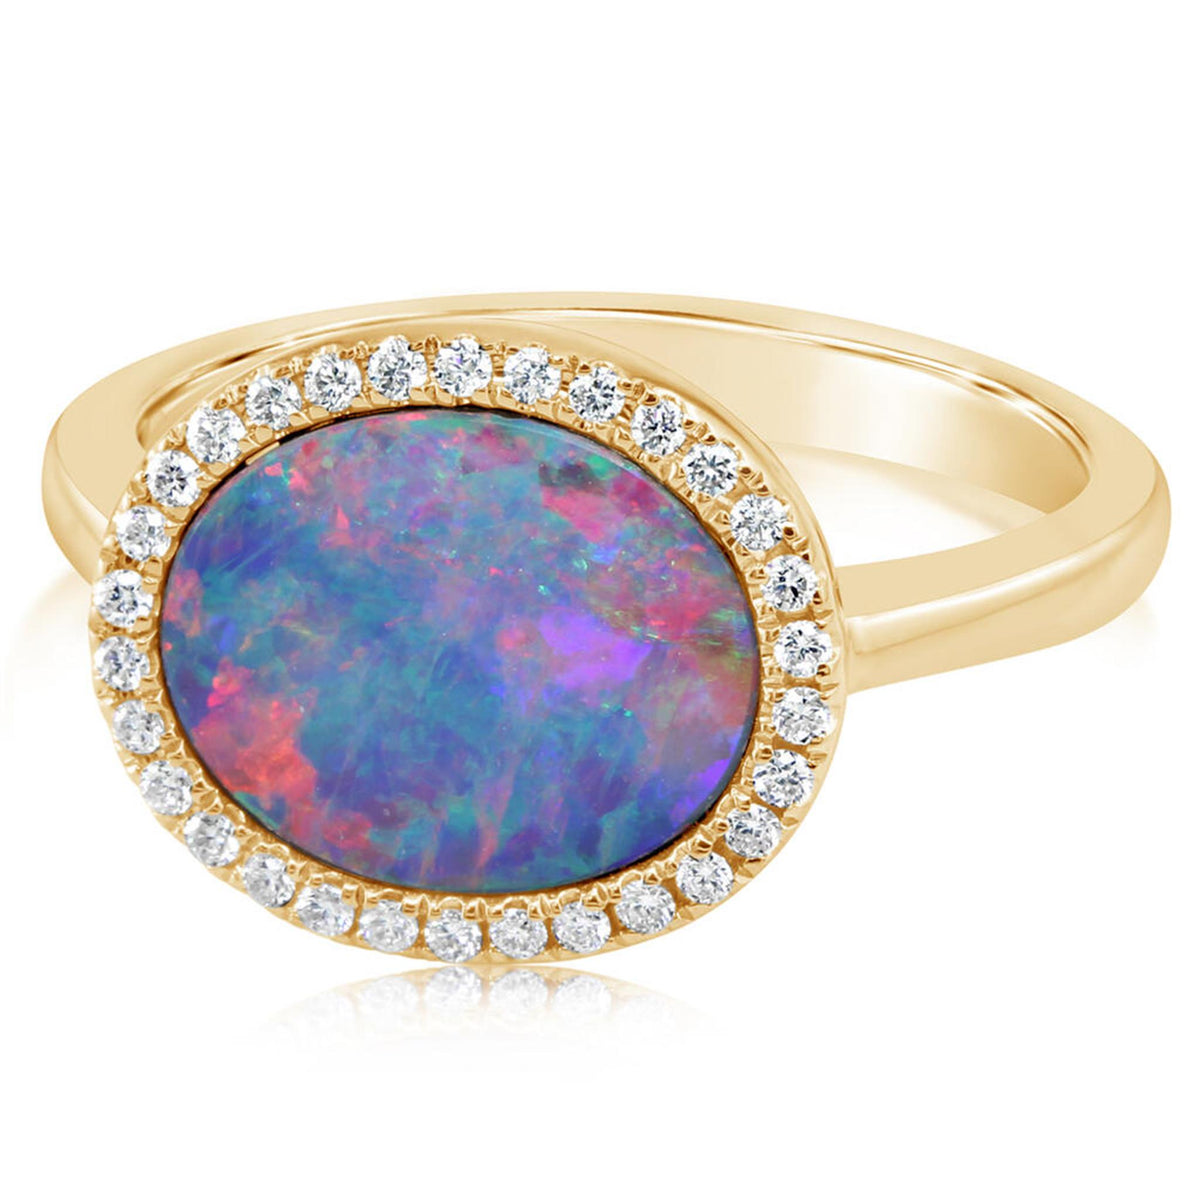 14Kt Yellow Gold 2.46Ct Austrailan Opal Doublet Halo Ring